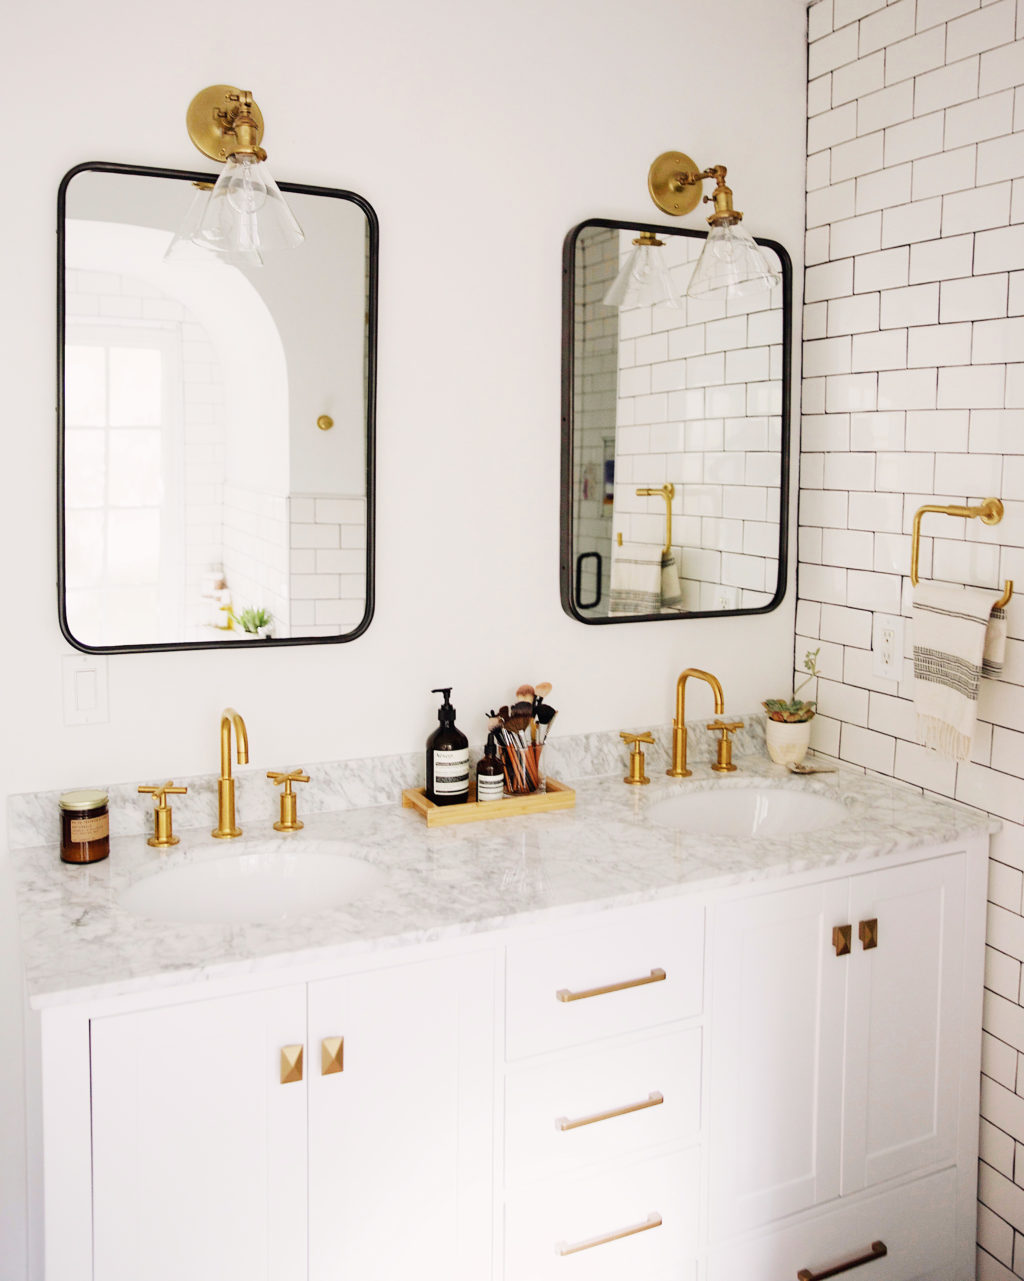 Our Master Bathroom: The Reveal